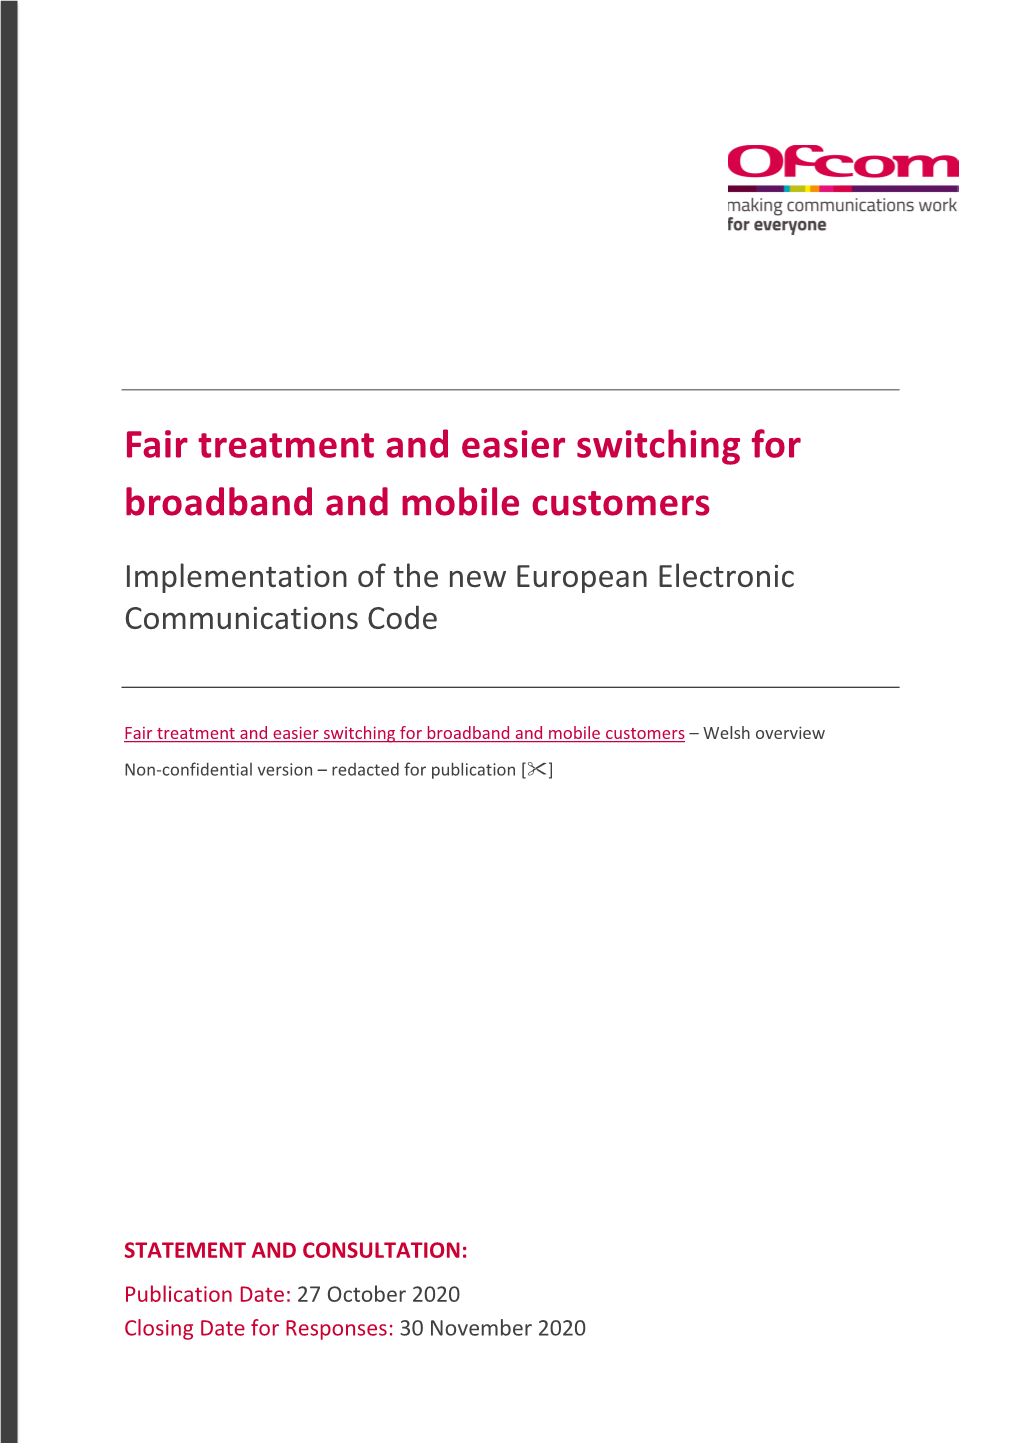 Fair Treatment and Easier Switching for Broadband and Mobile Customers Implementation of the New European Electronic Communications Code